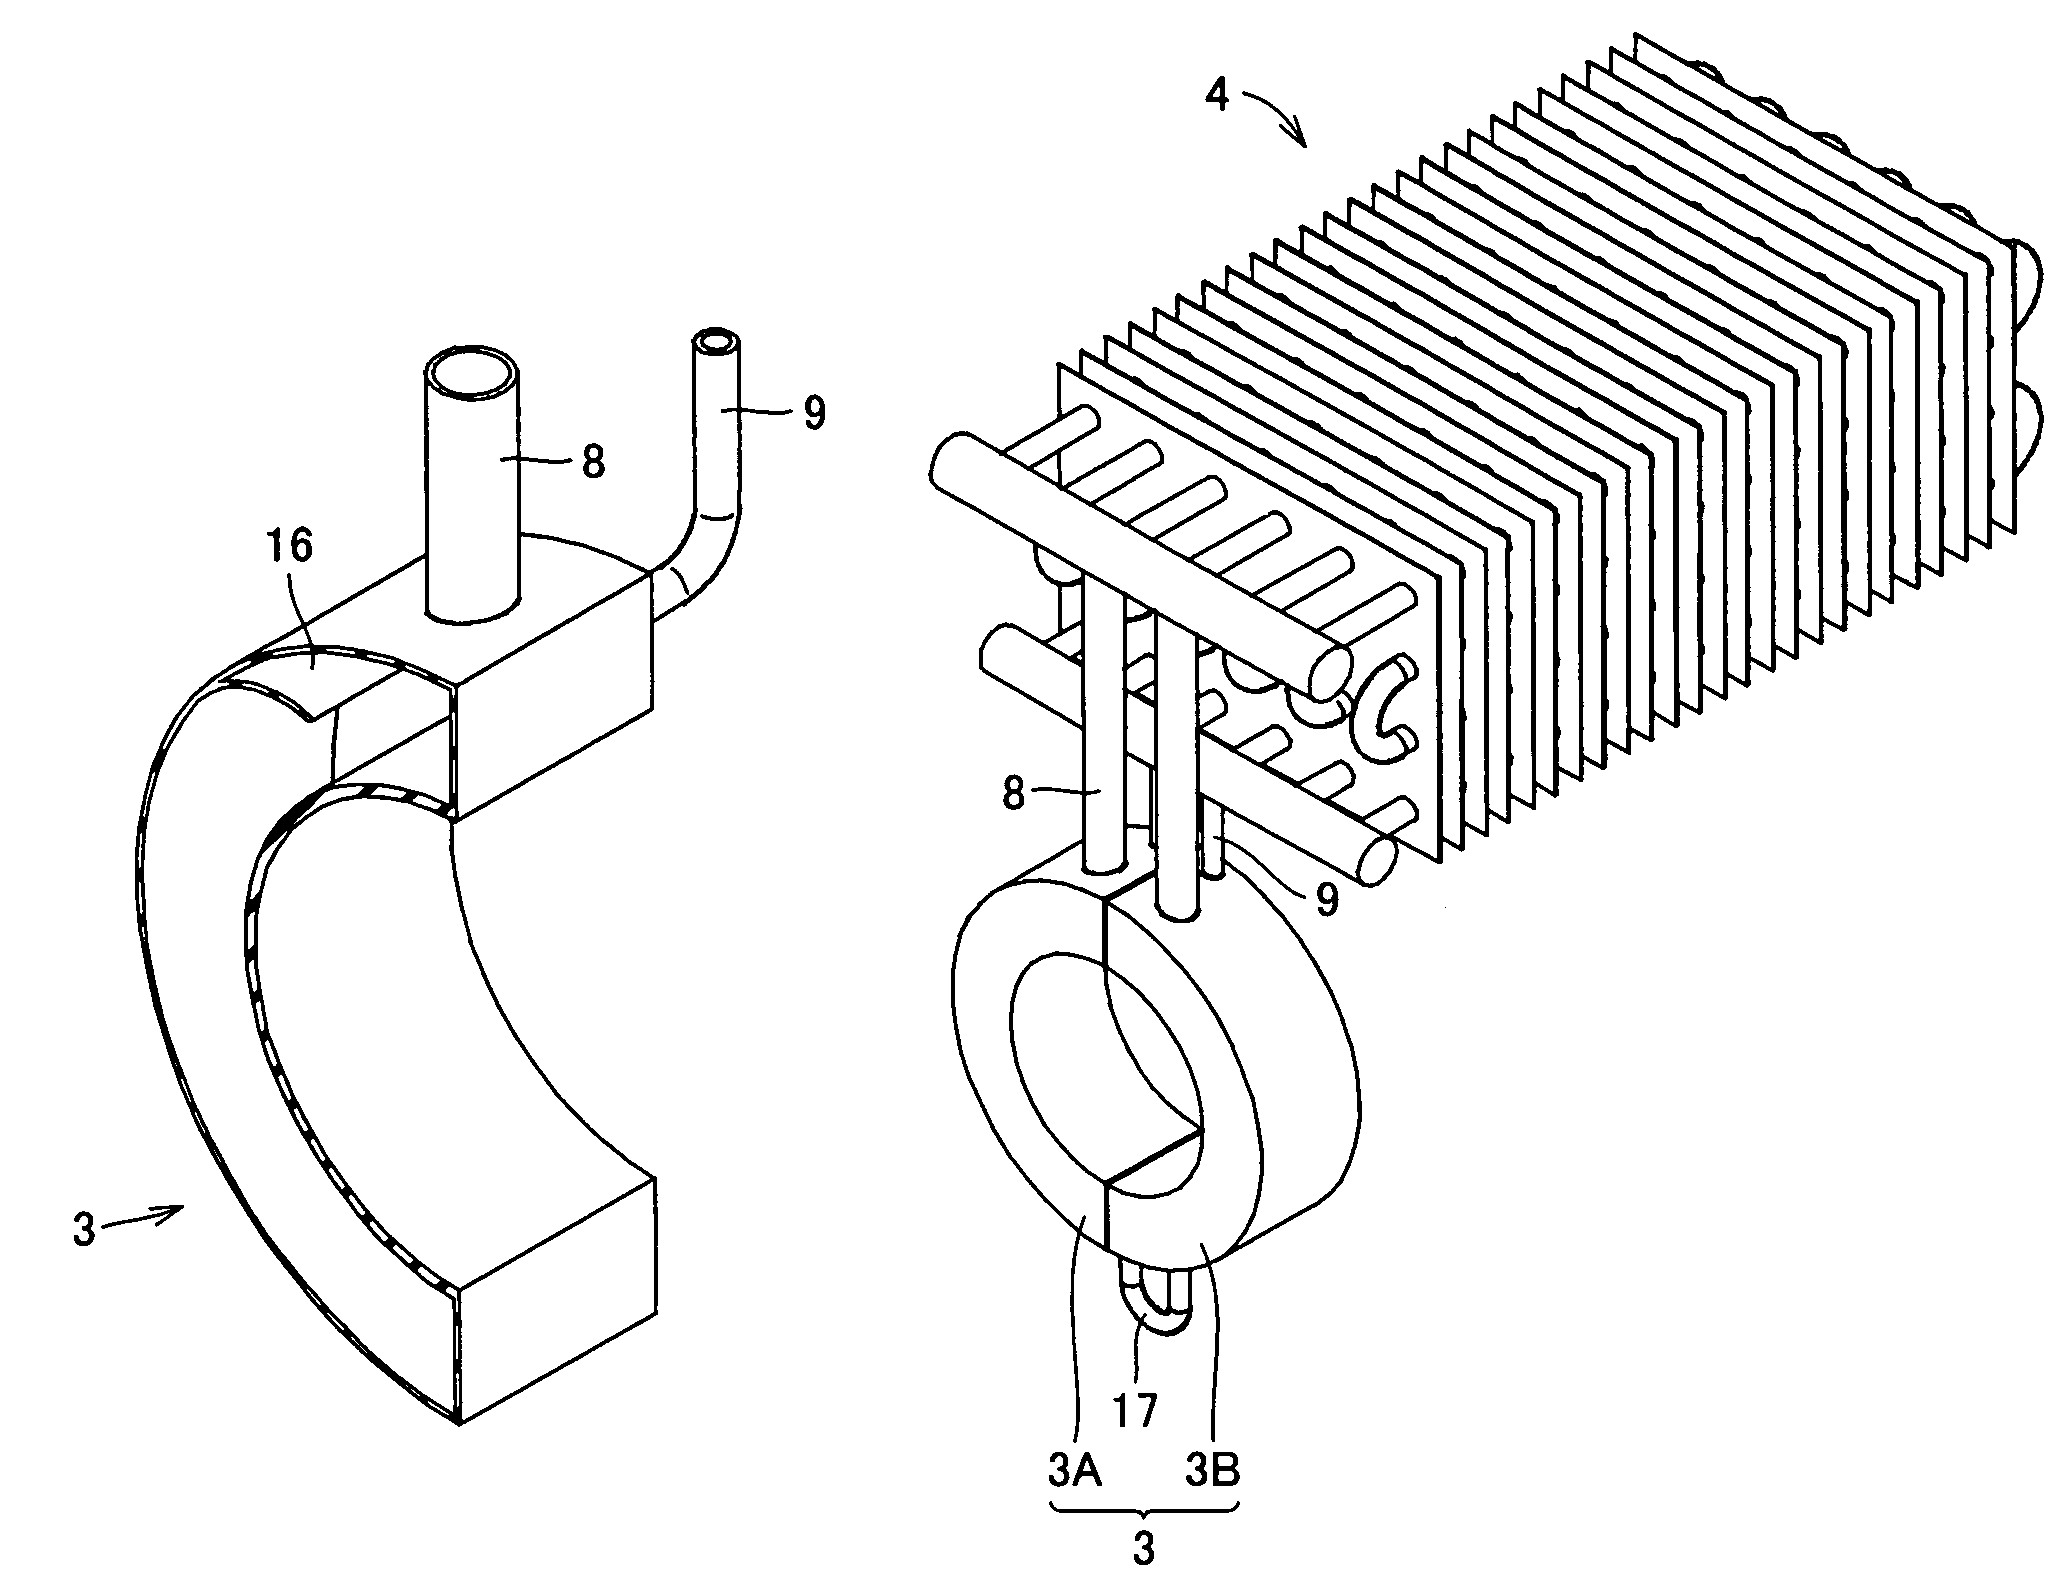 Loop type thermo syphone, heat radiation system, heat exchange system, and stirling cooling chamber